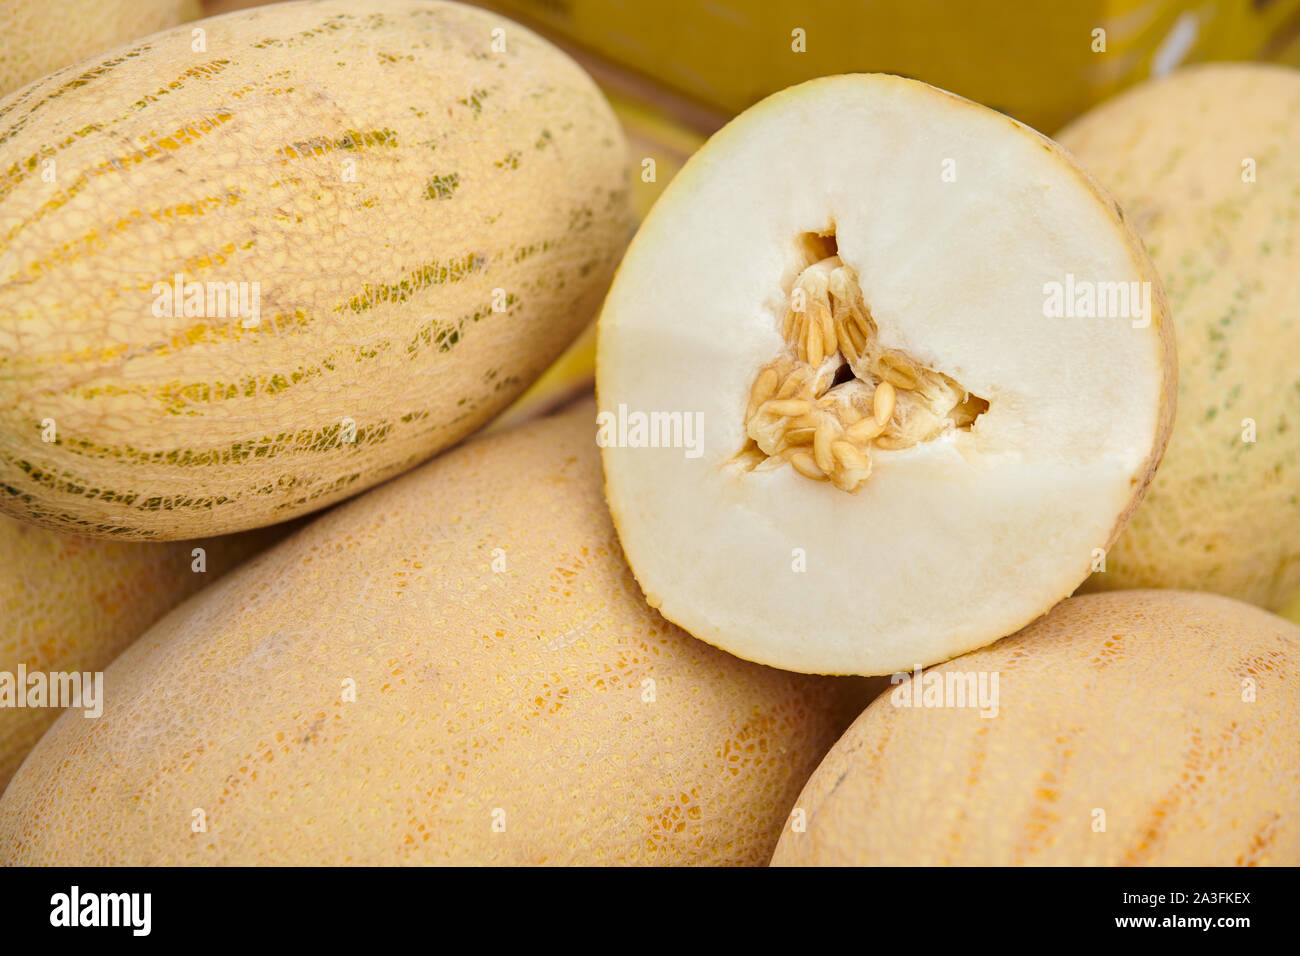 Ripe melon cut in half laying on a bunch of yellow melons. Melon with seeds. Degustation at the market. Stock Photo